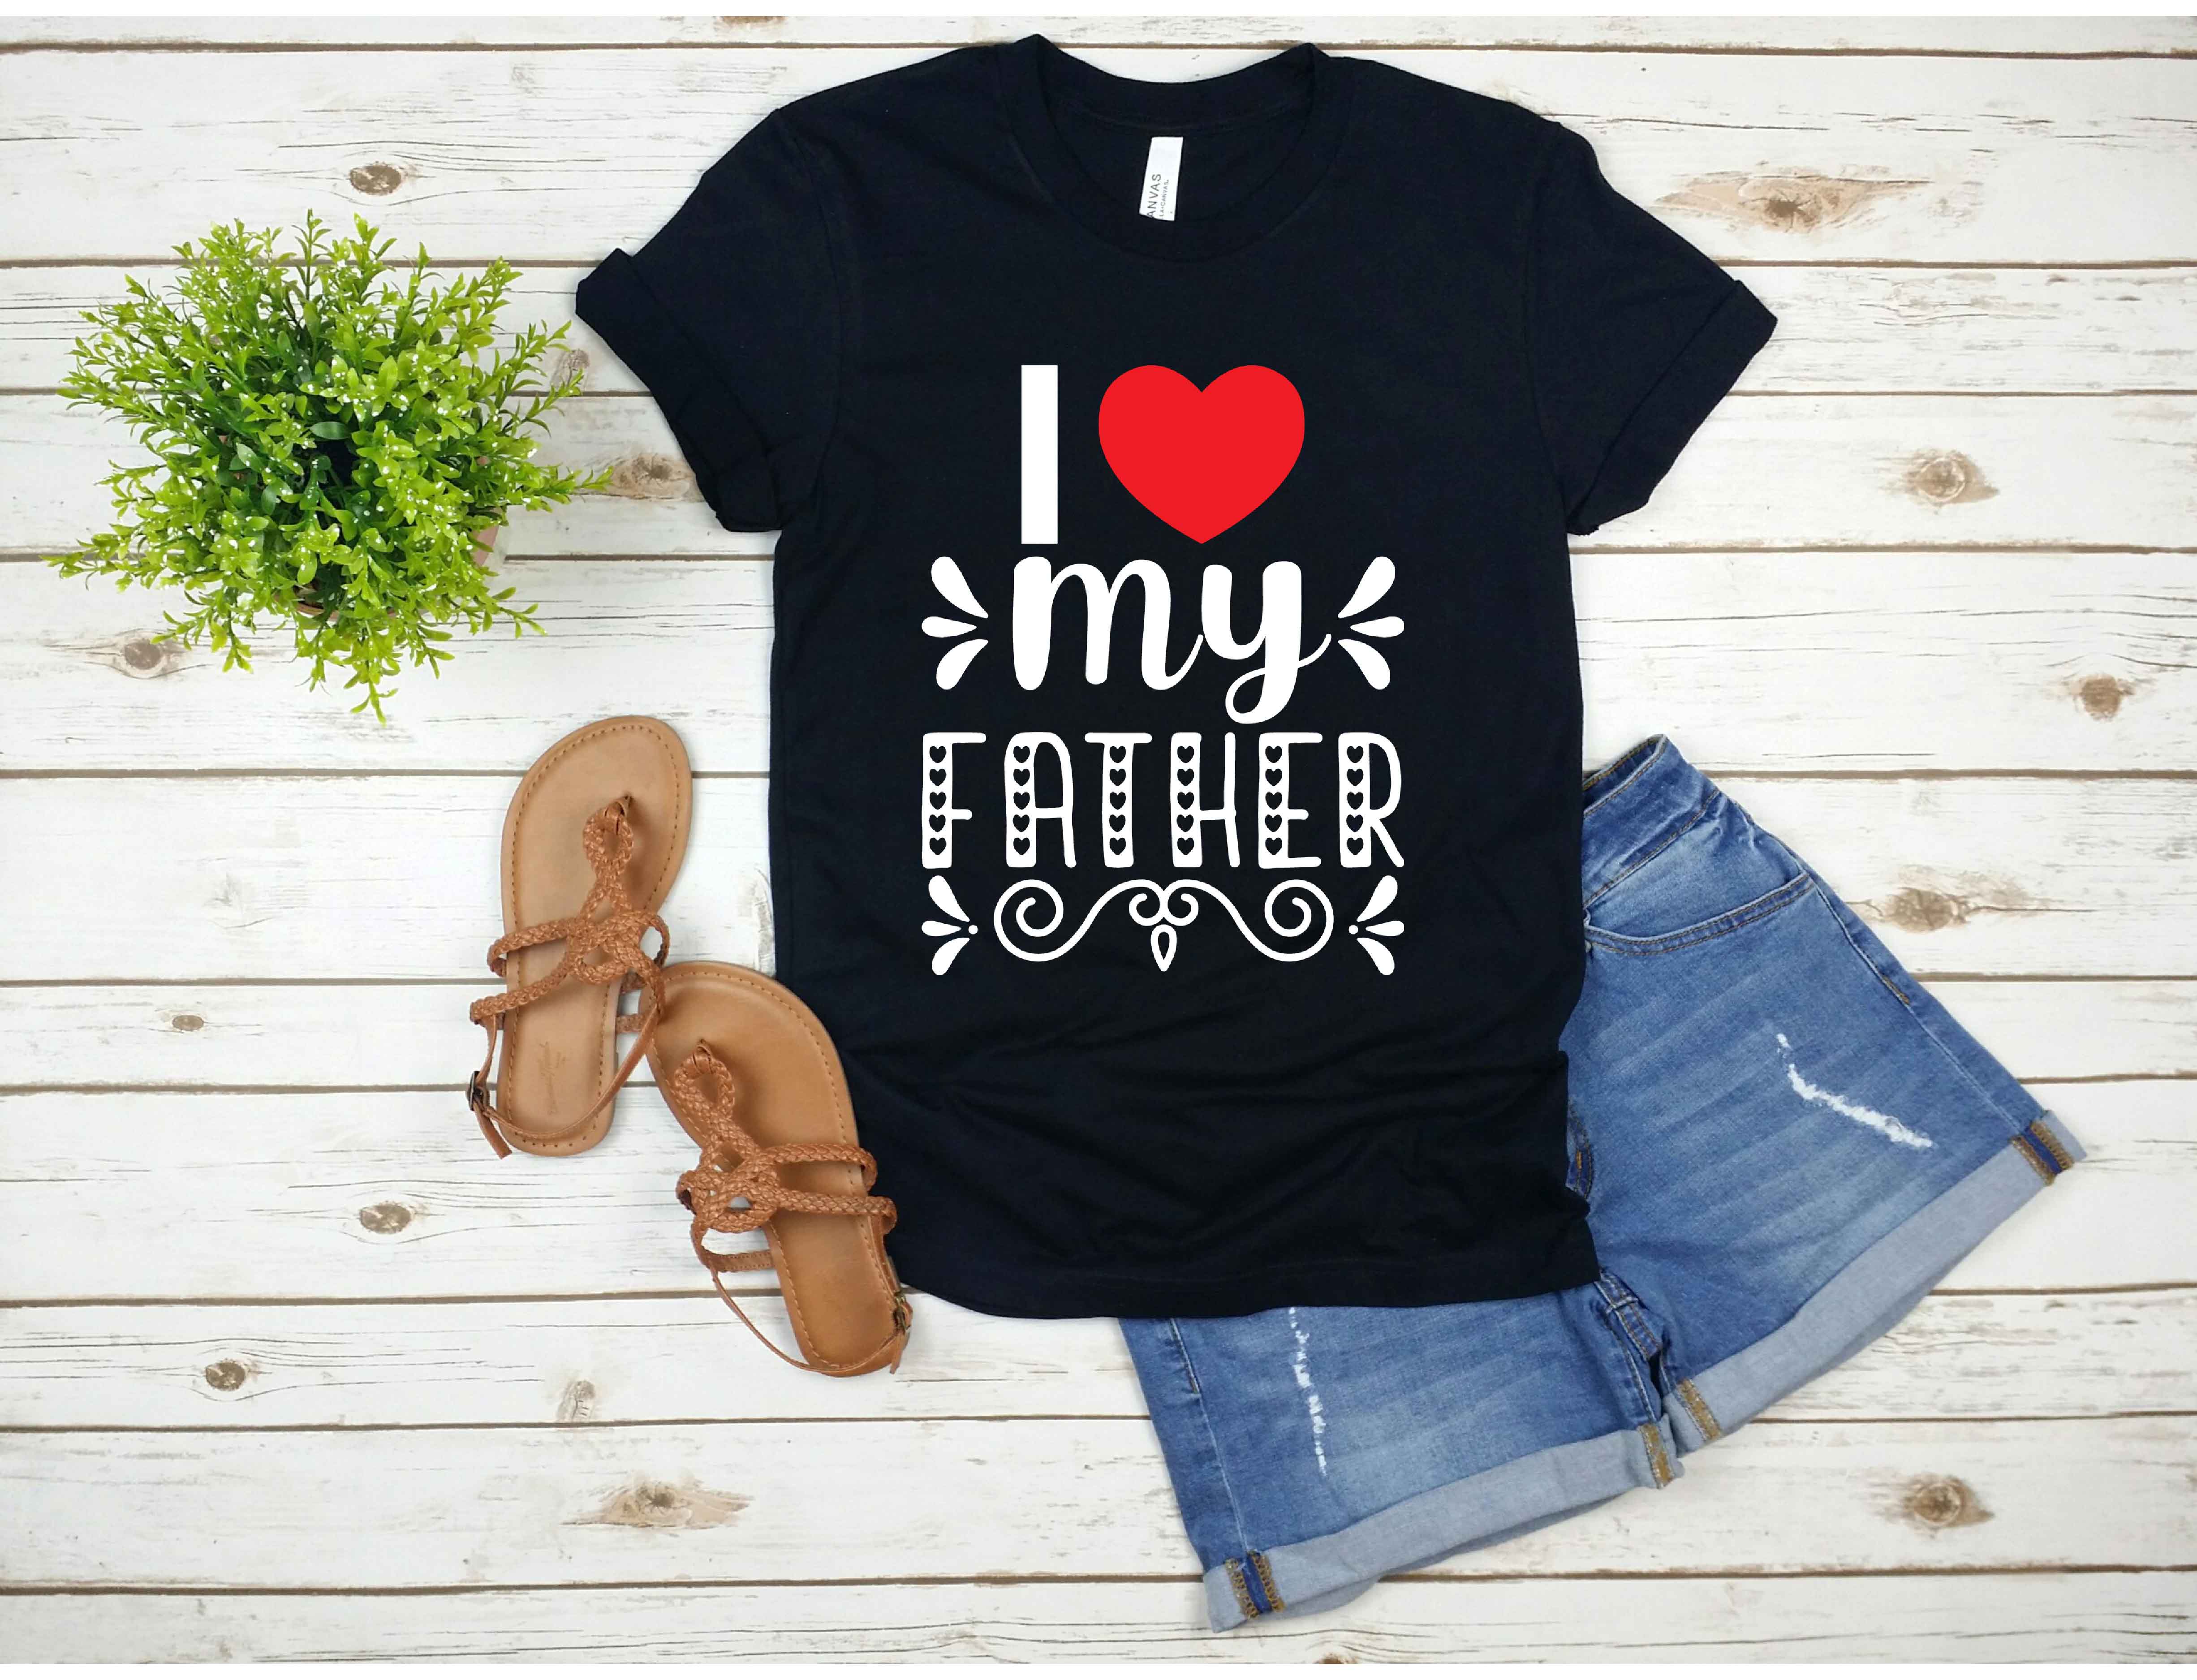 T - shirt that says i love my father with a heart.